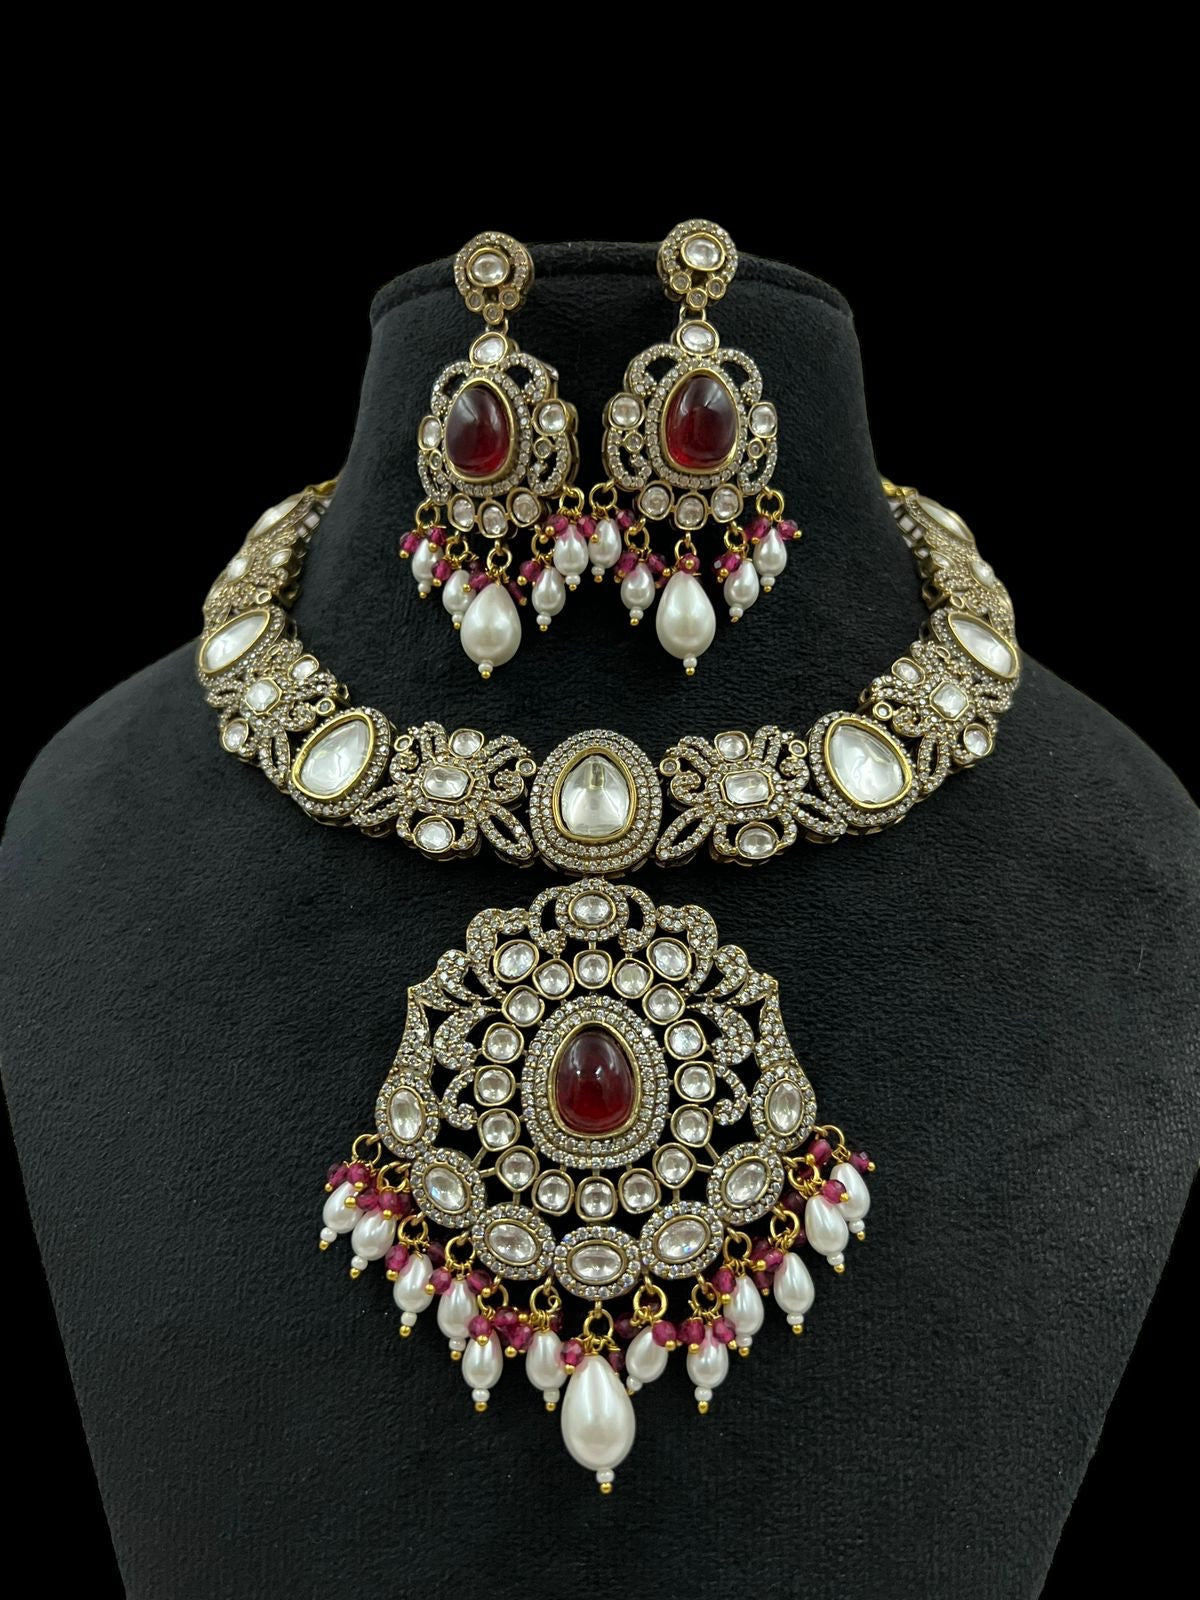 Victorian ad necklace | Latest Indian jewelry